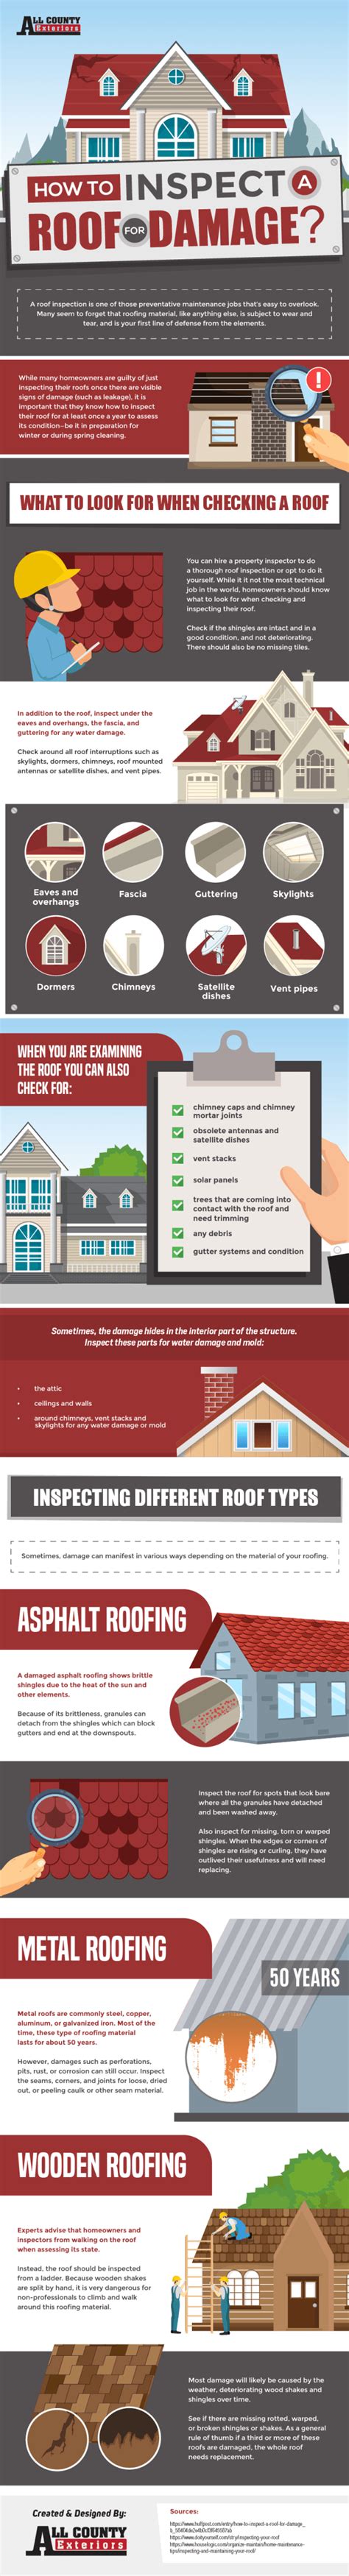 How To Inspect A Roof For Damage Infographic